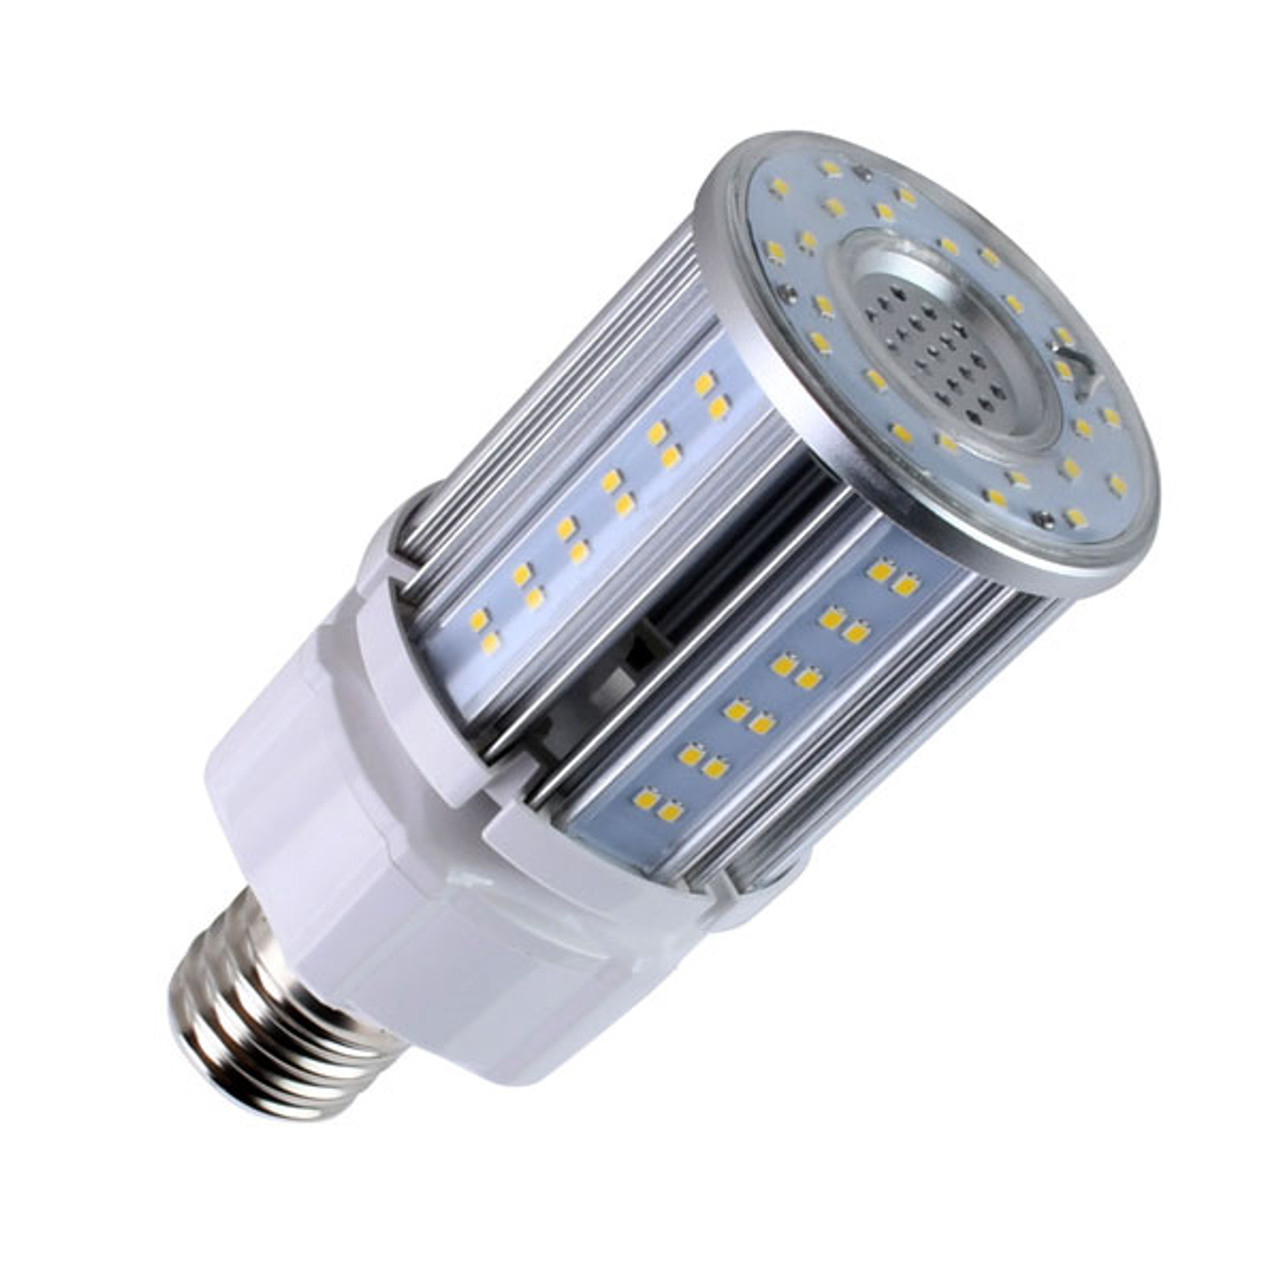 20 Watt LED IP64 Corn Bulb, Replaces 100 Watt HID, 3,000 Lumens, IP64,  Approved for Enclosed Fixtures, 5 Year Warranty - LED Global Supply